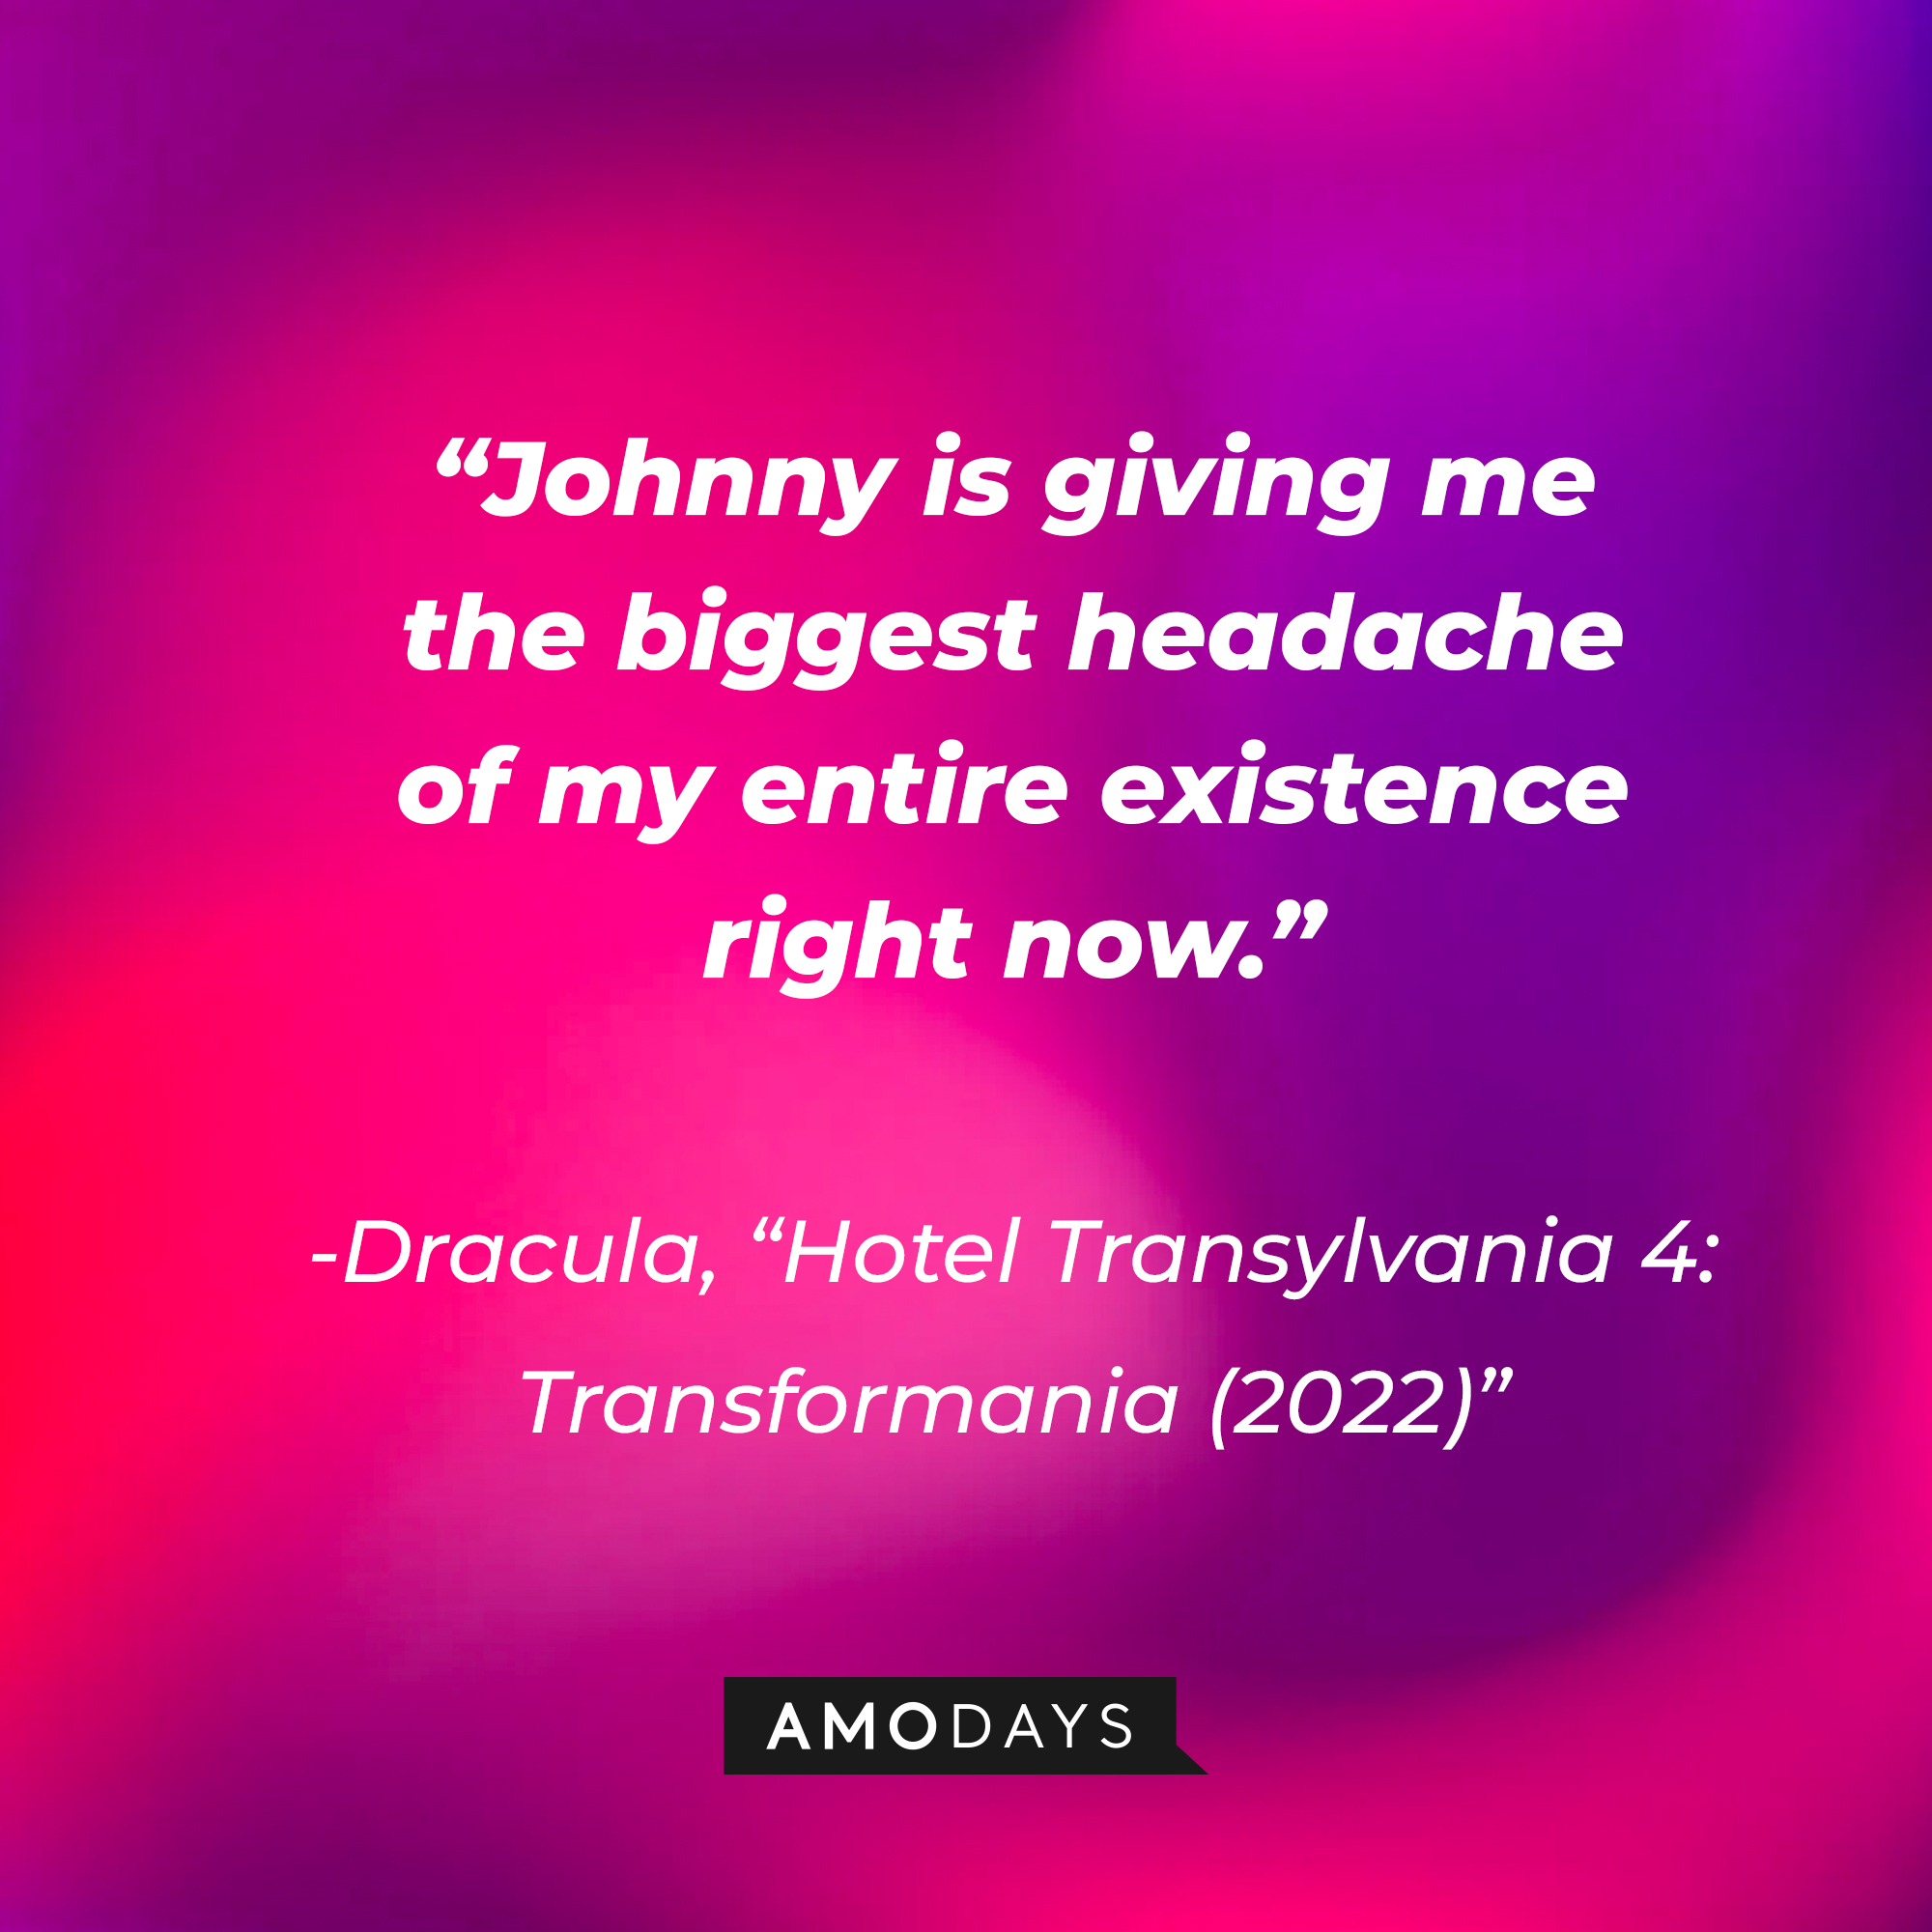 Dracula's quote: “Johnny is giving me the biggest headache of my entire existence right now.” | Source: Amodays